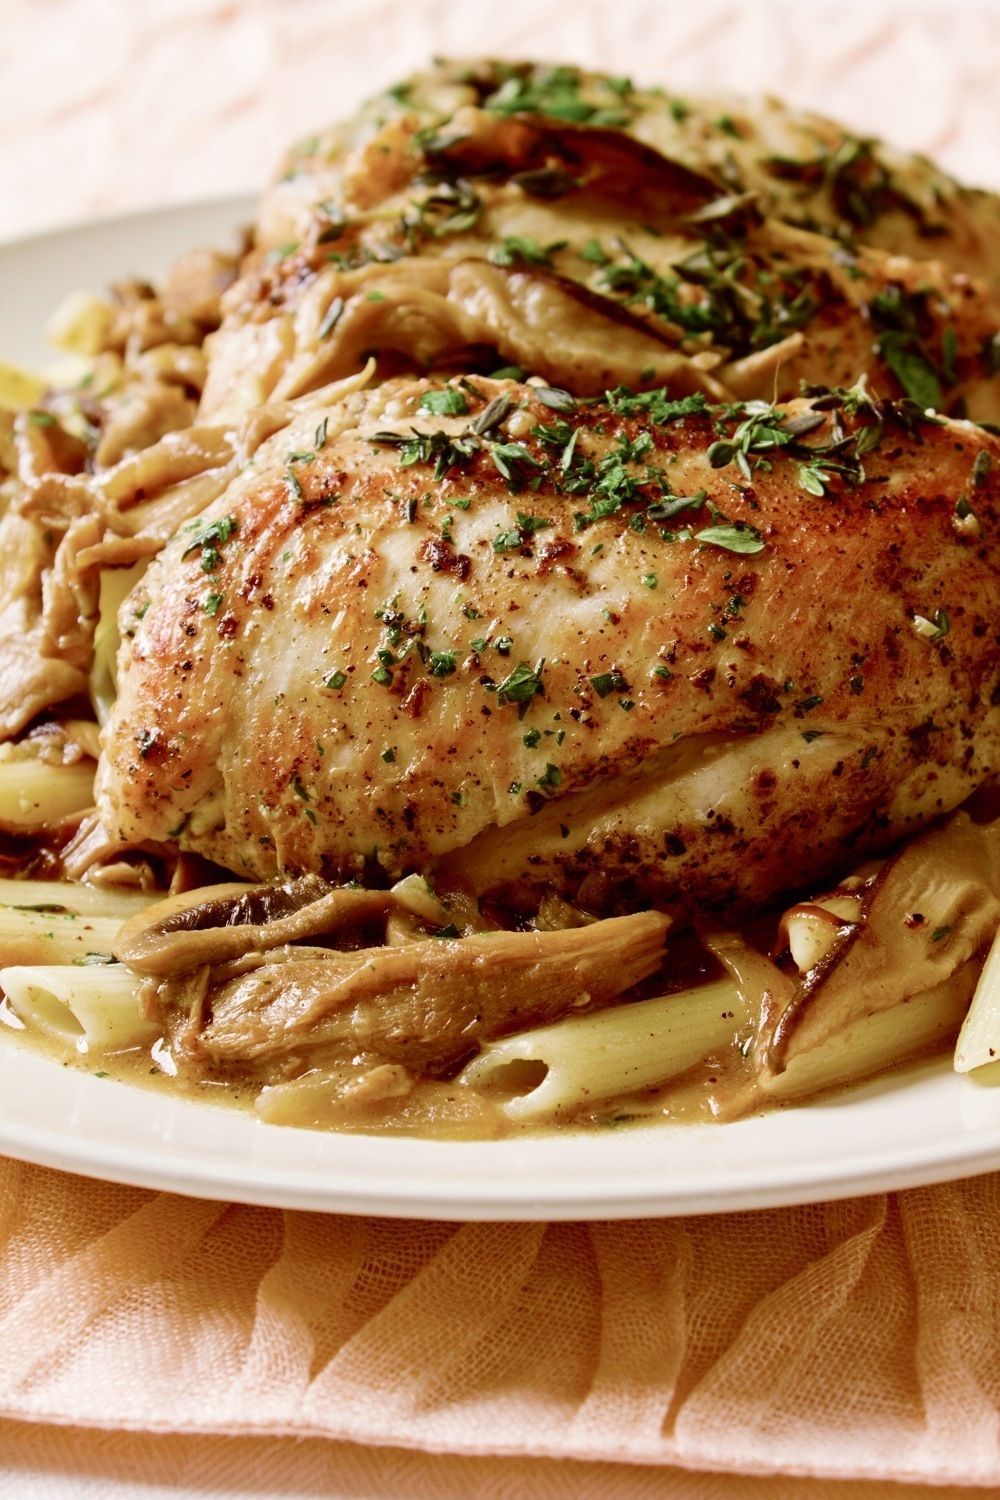 Use a pressure cooker to achieve this simple chicken dinner.